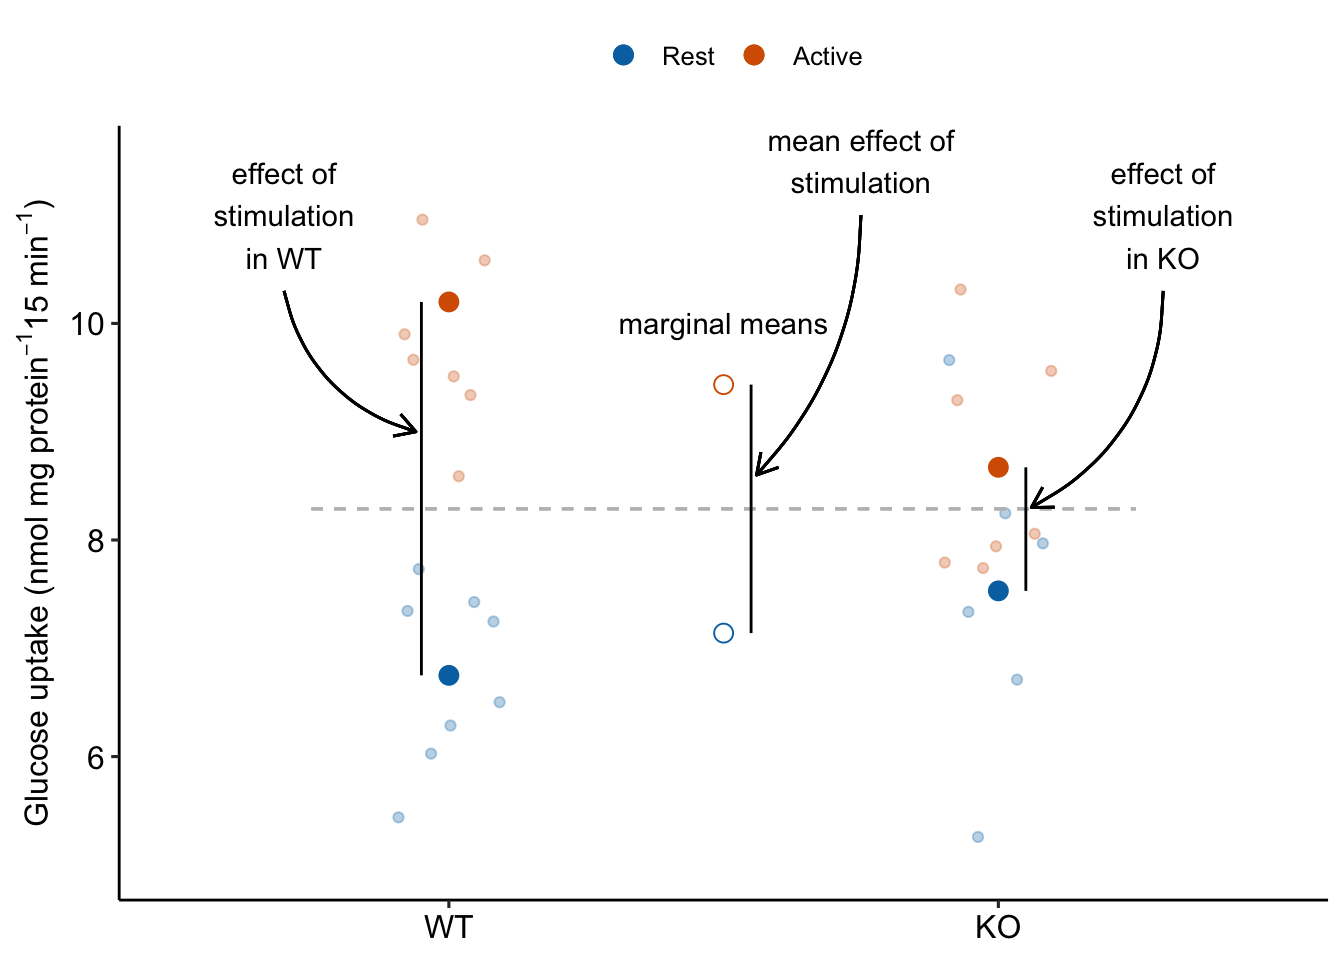 The main effect of stimulation in the ANOVA table tests the average of the conditional effects of stimulation. The average of the conditional effects is the difference between the marginal means of Active and of Rest.